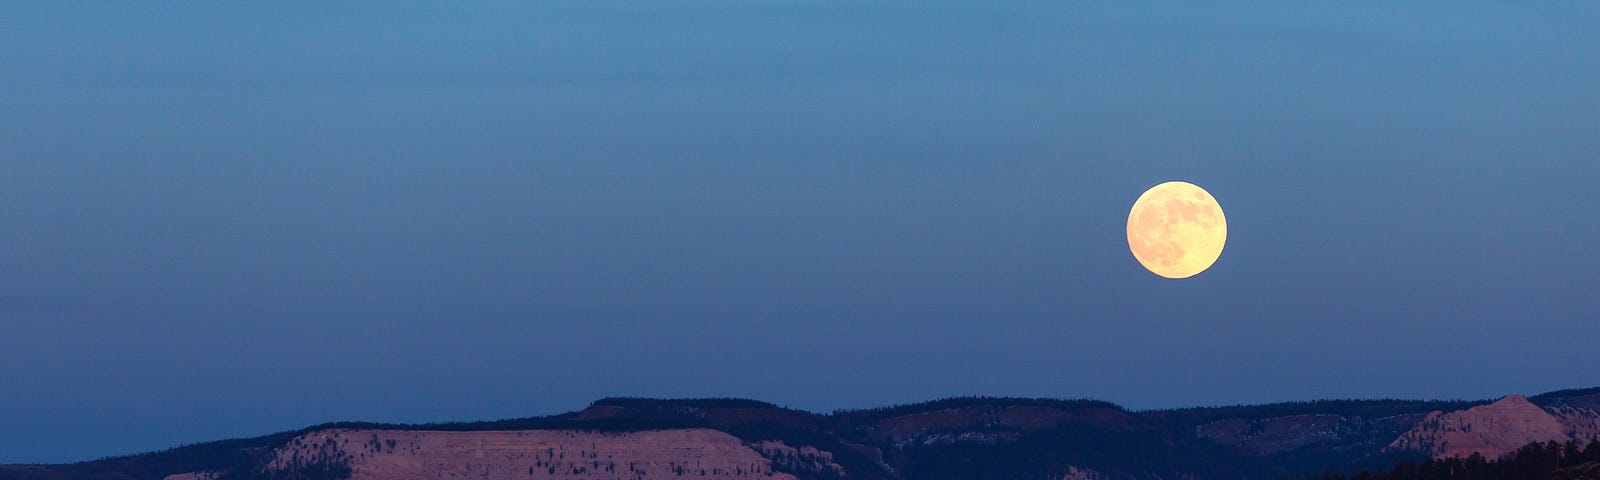 Moody photo of a full moon rising over a small mountain range at twilight.